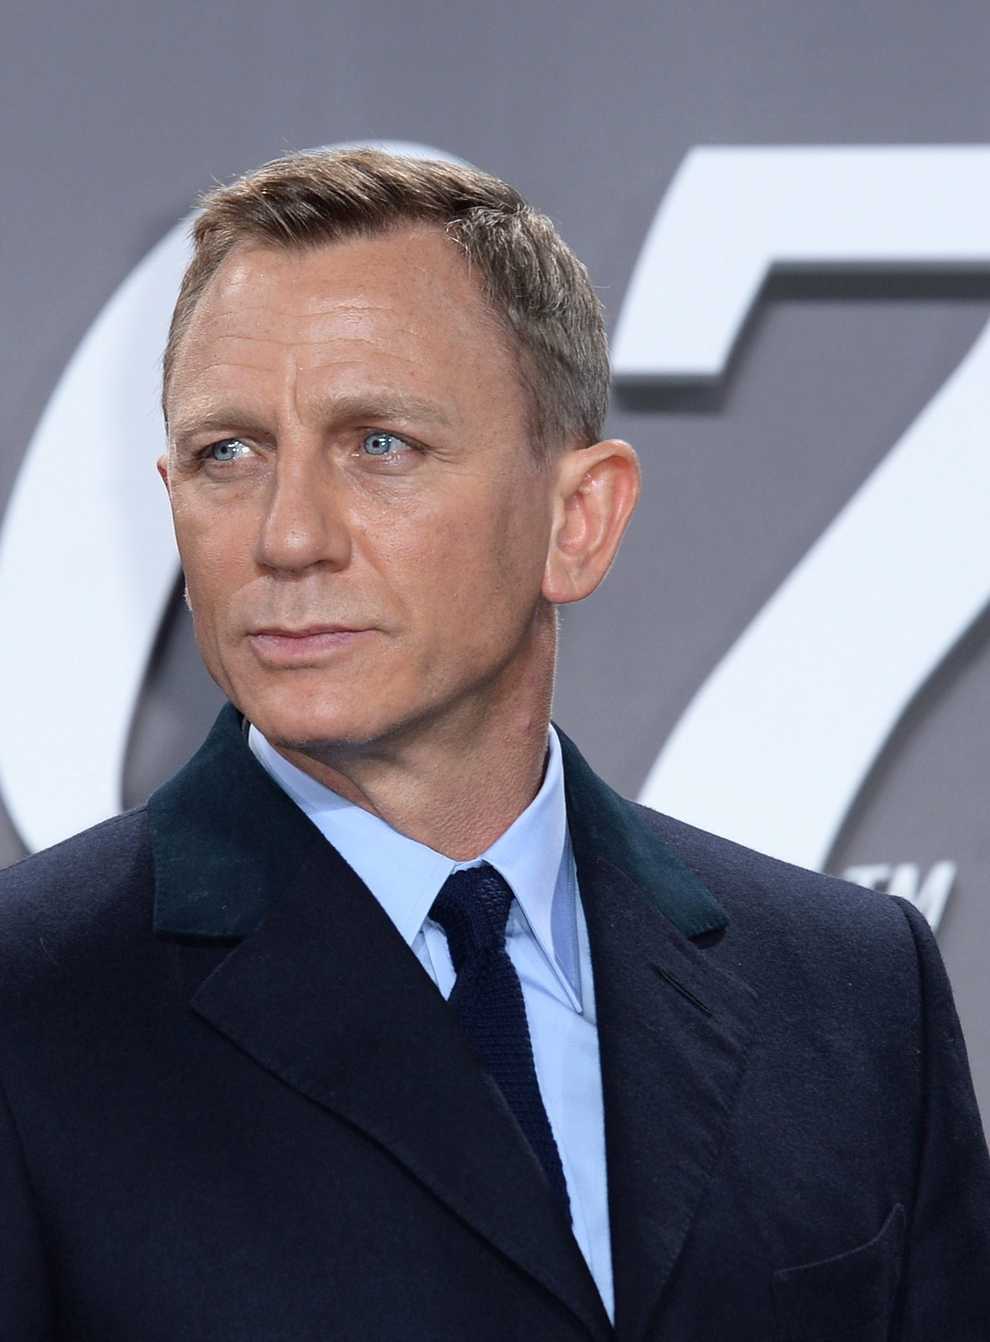 Craig will not reprise the role of Bond for the next film